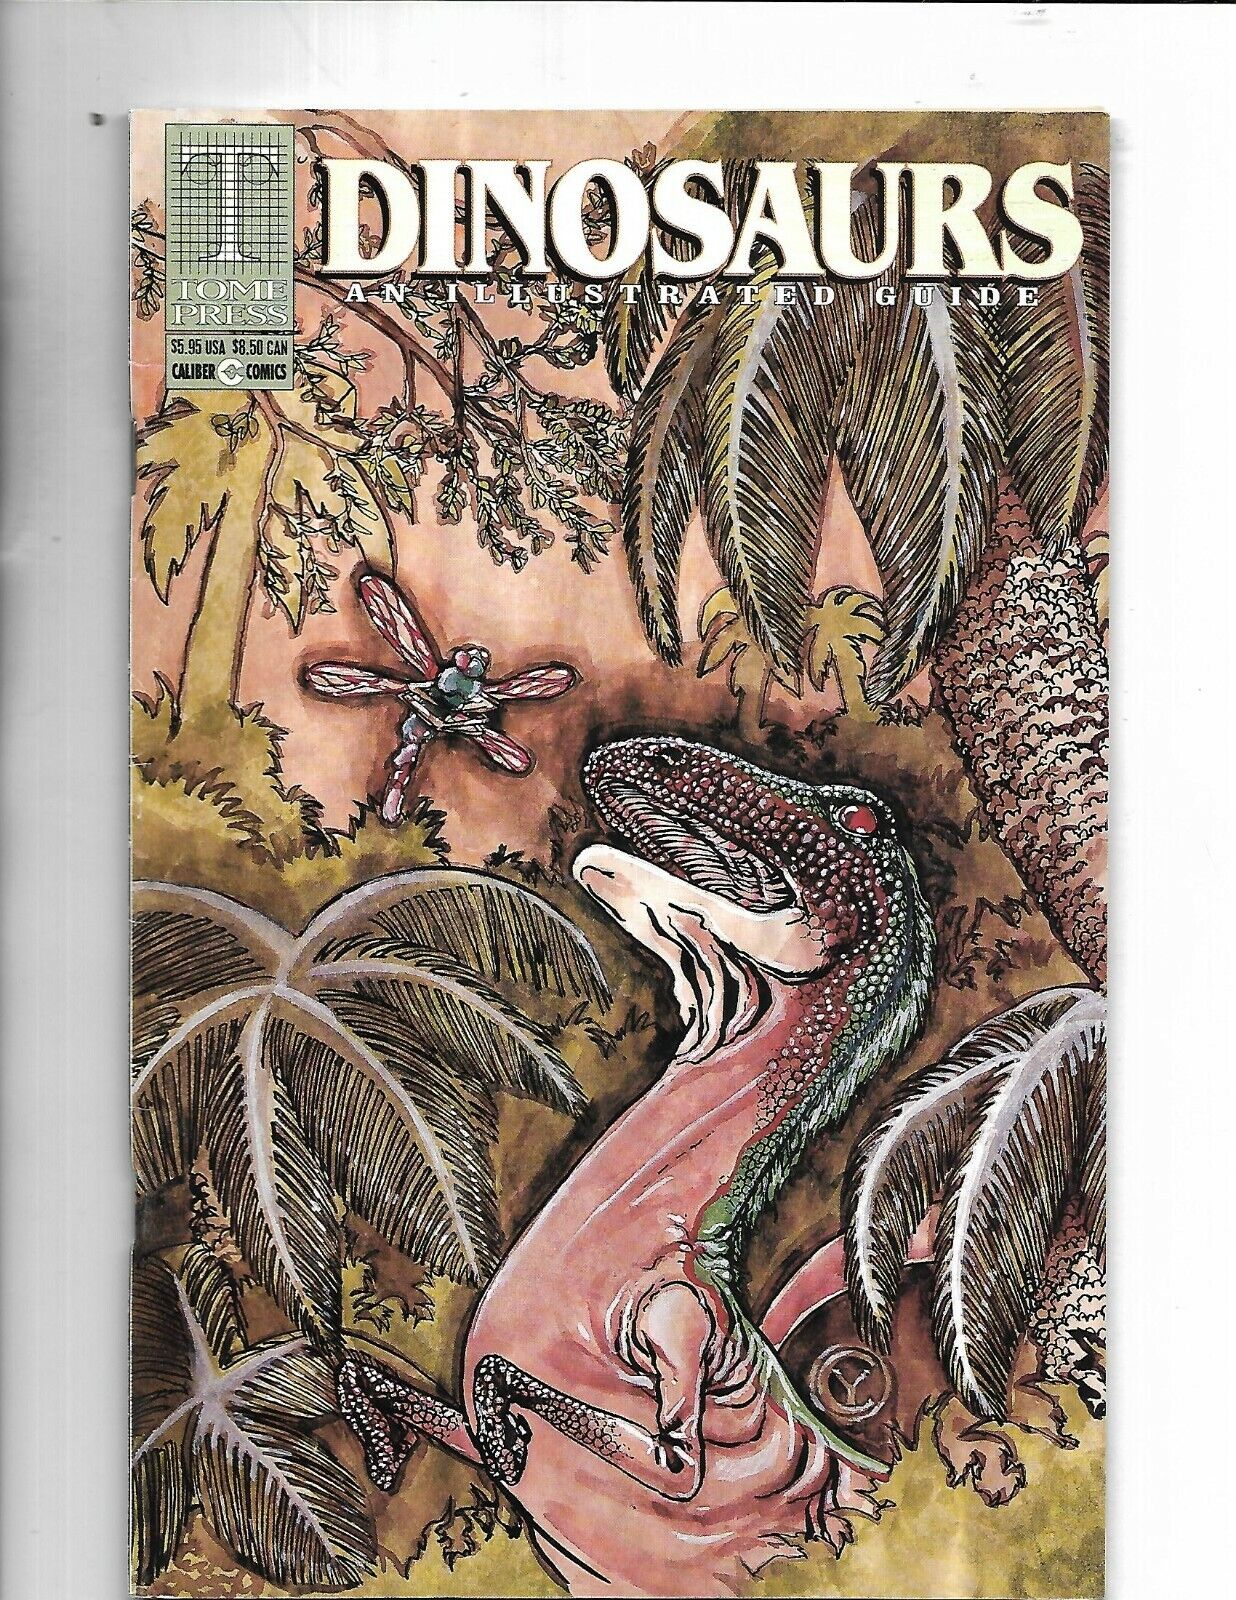 DINOSAURS An Illustrated Guide TOME PRESS - FINE